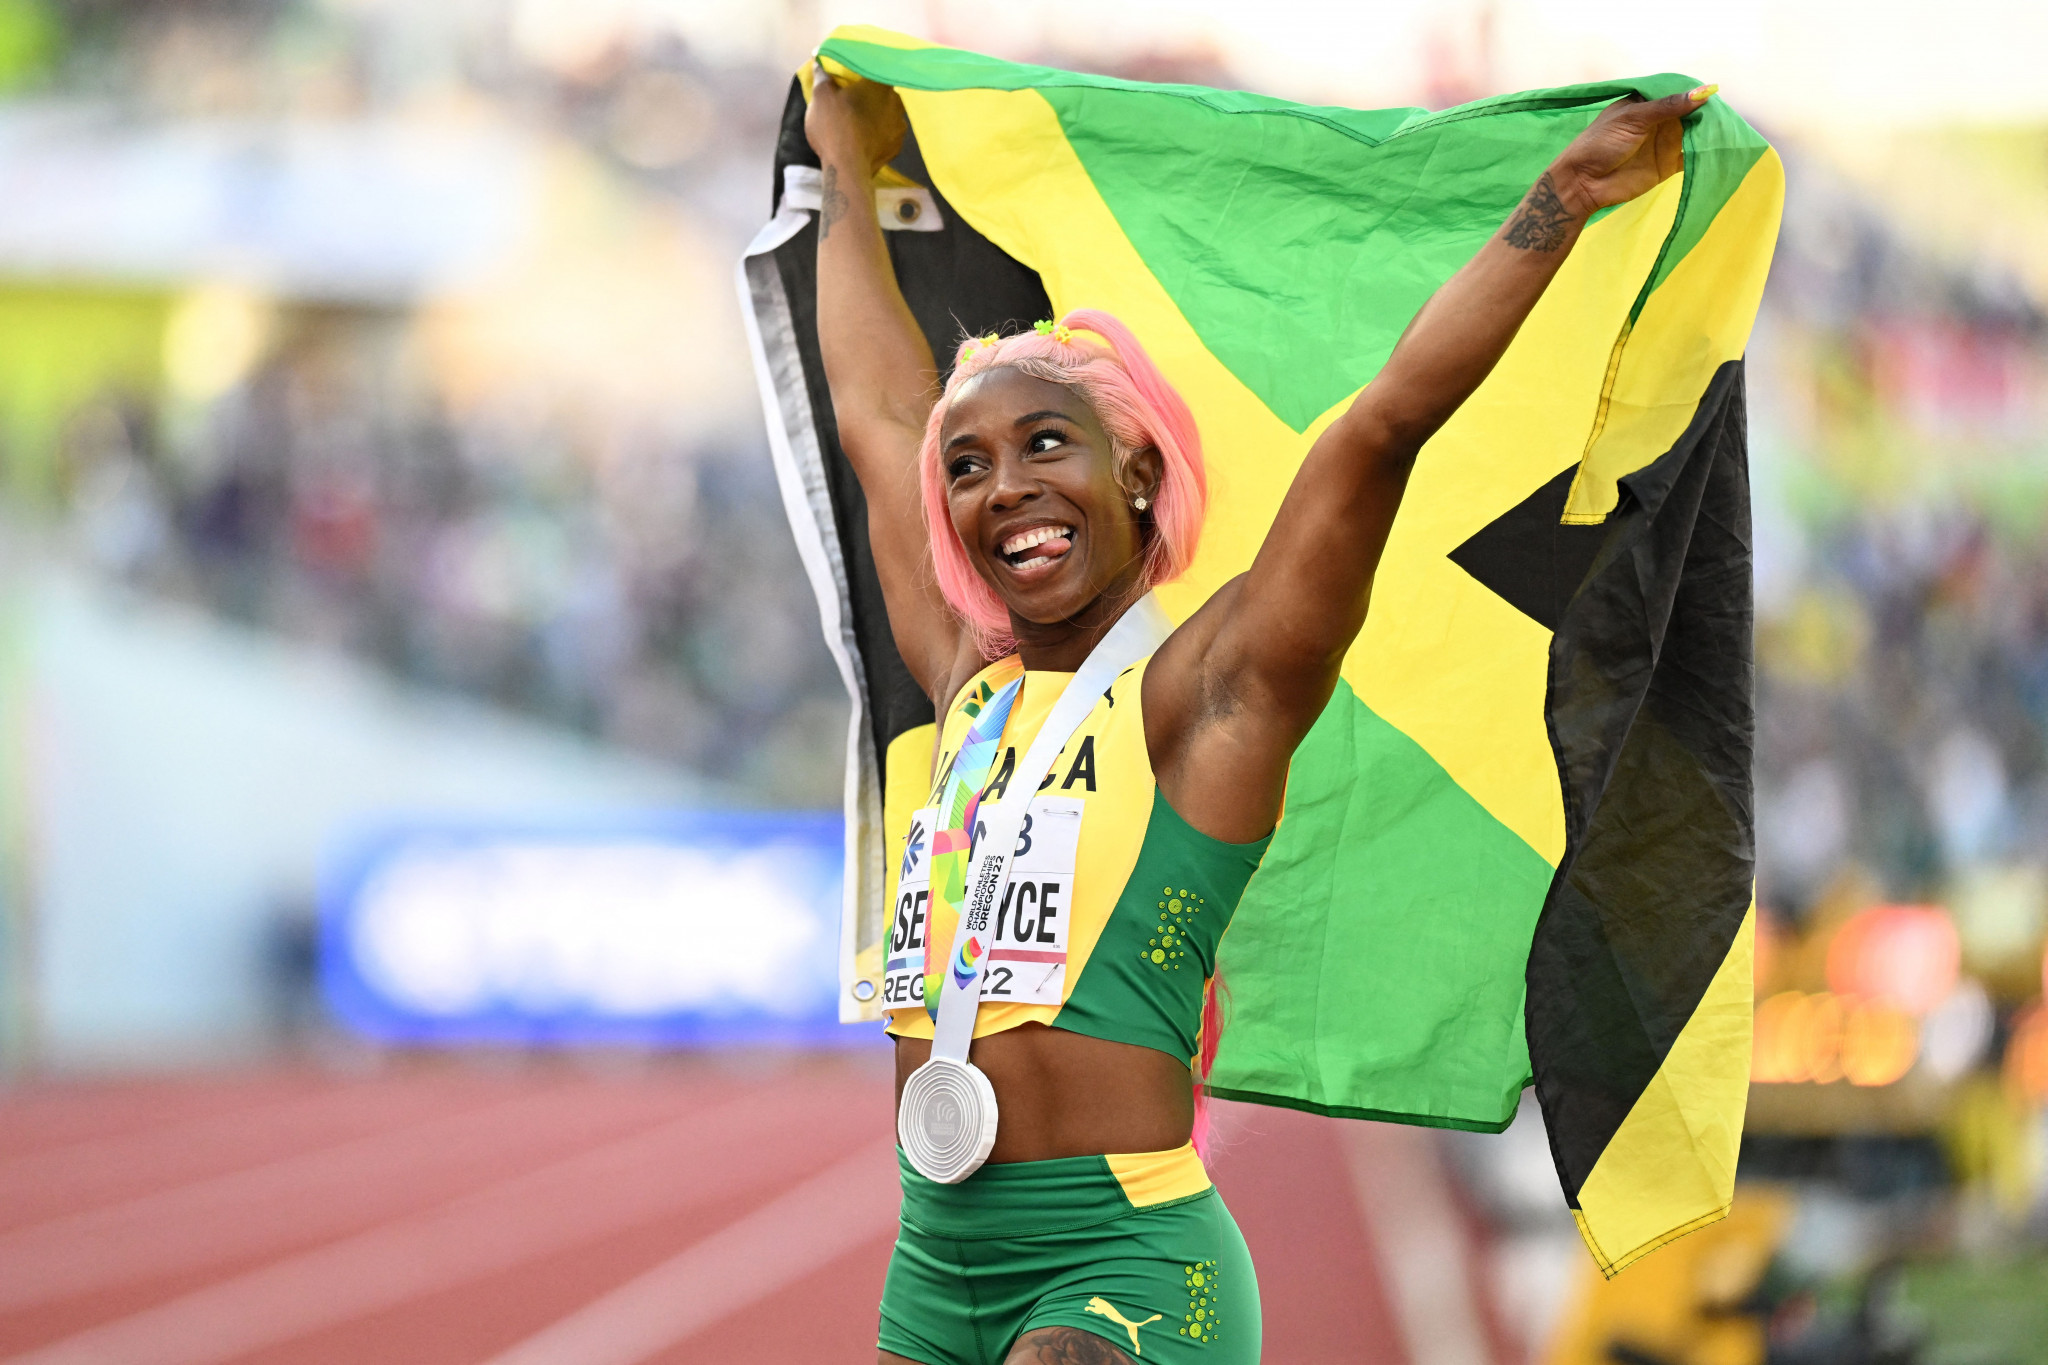 Jackson's countrywoman Shelly-Ann Fraser-Pryce clocked in with a season's best of 21.81 to win silver and add to her 100m gold from Oregon22 ©Getty Images